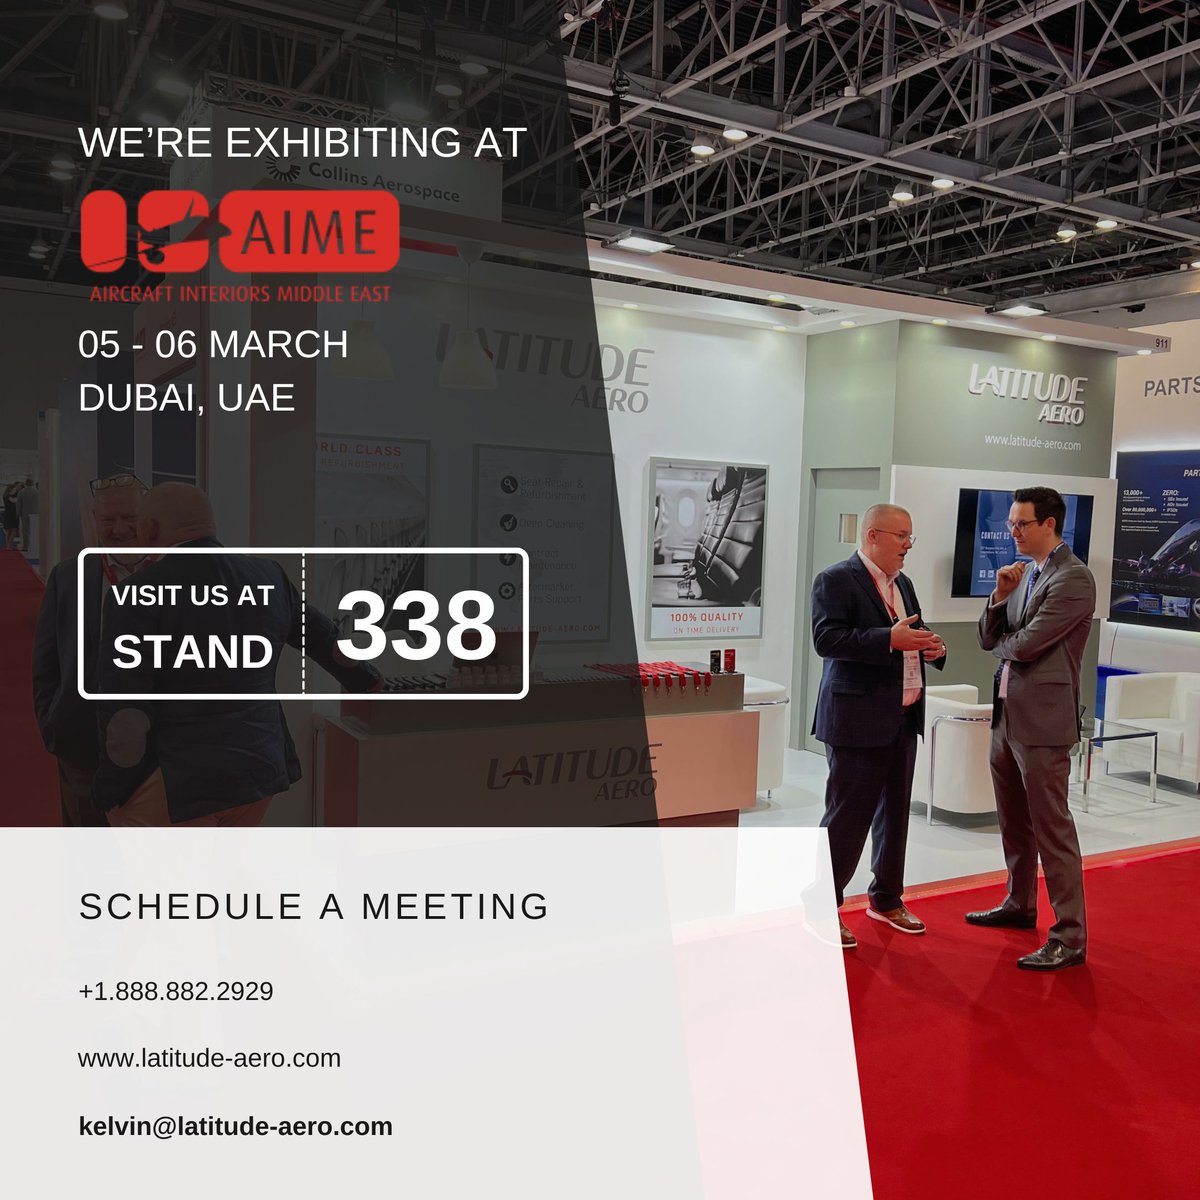 Aircraft Interiors Middle East is just around the corner! Don't miss the opportunity to #connect; reach out to kelvin@latitude-aero.com to schedule your meeting today. #AIME #MROME #MRO #Dubai #Aviation #avgeek #paxex